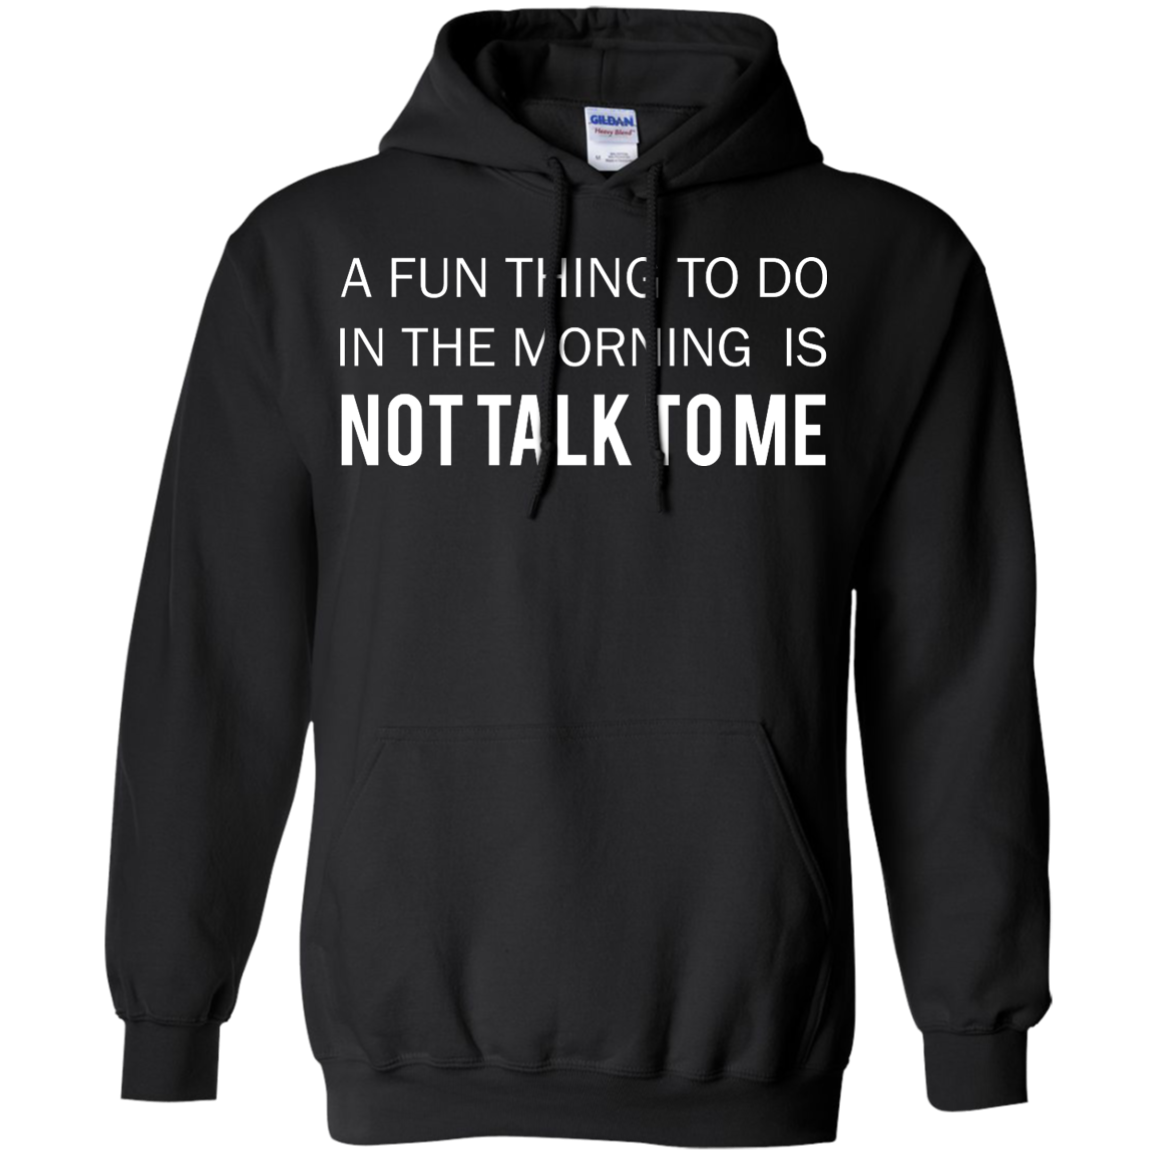 A Fun Thing To Do in the Morning is Not Talk To Me shirt, sweater, tan